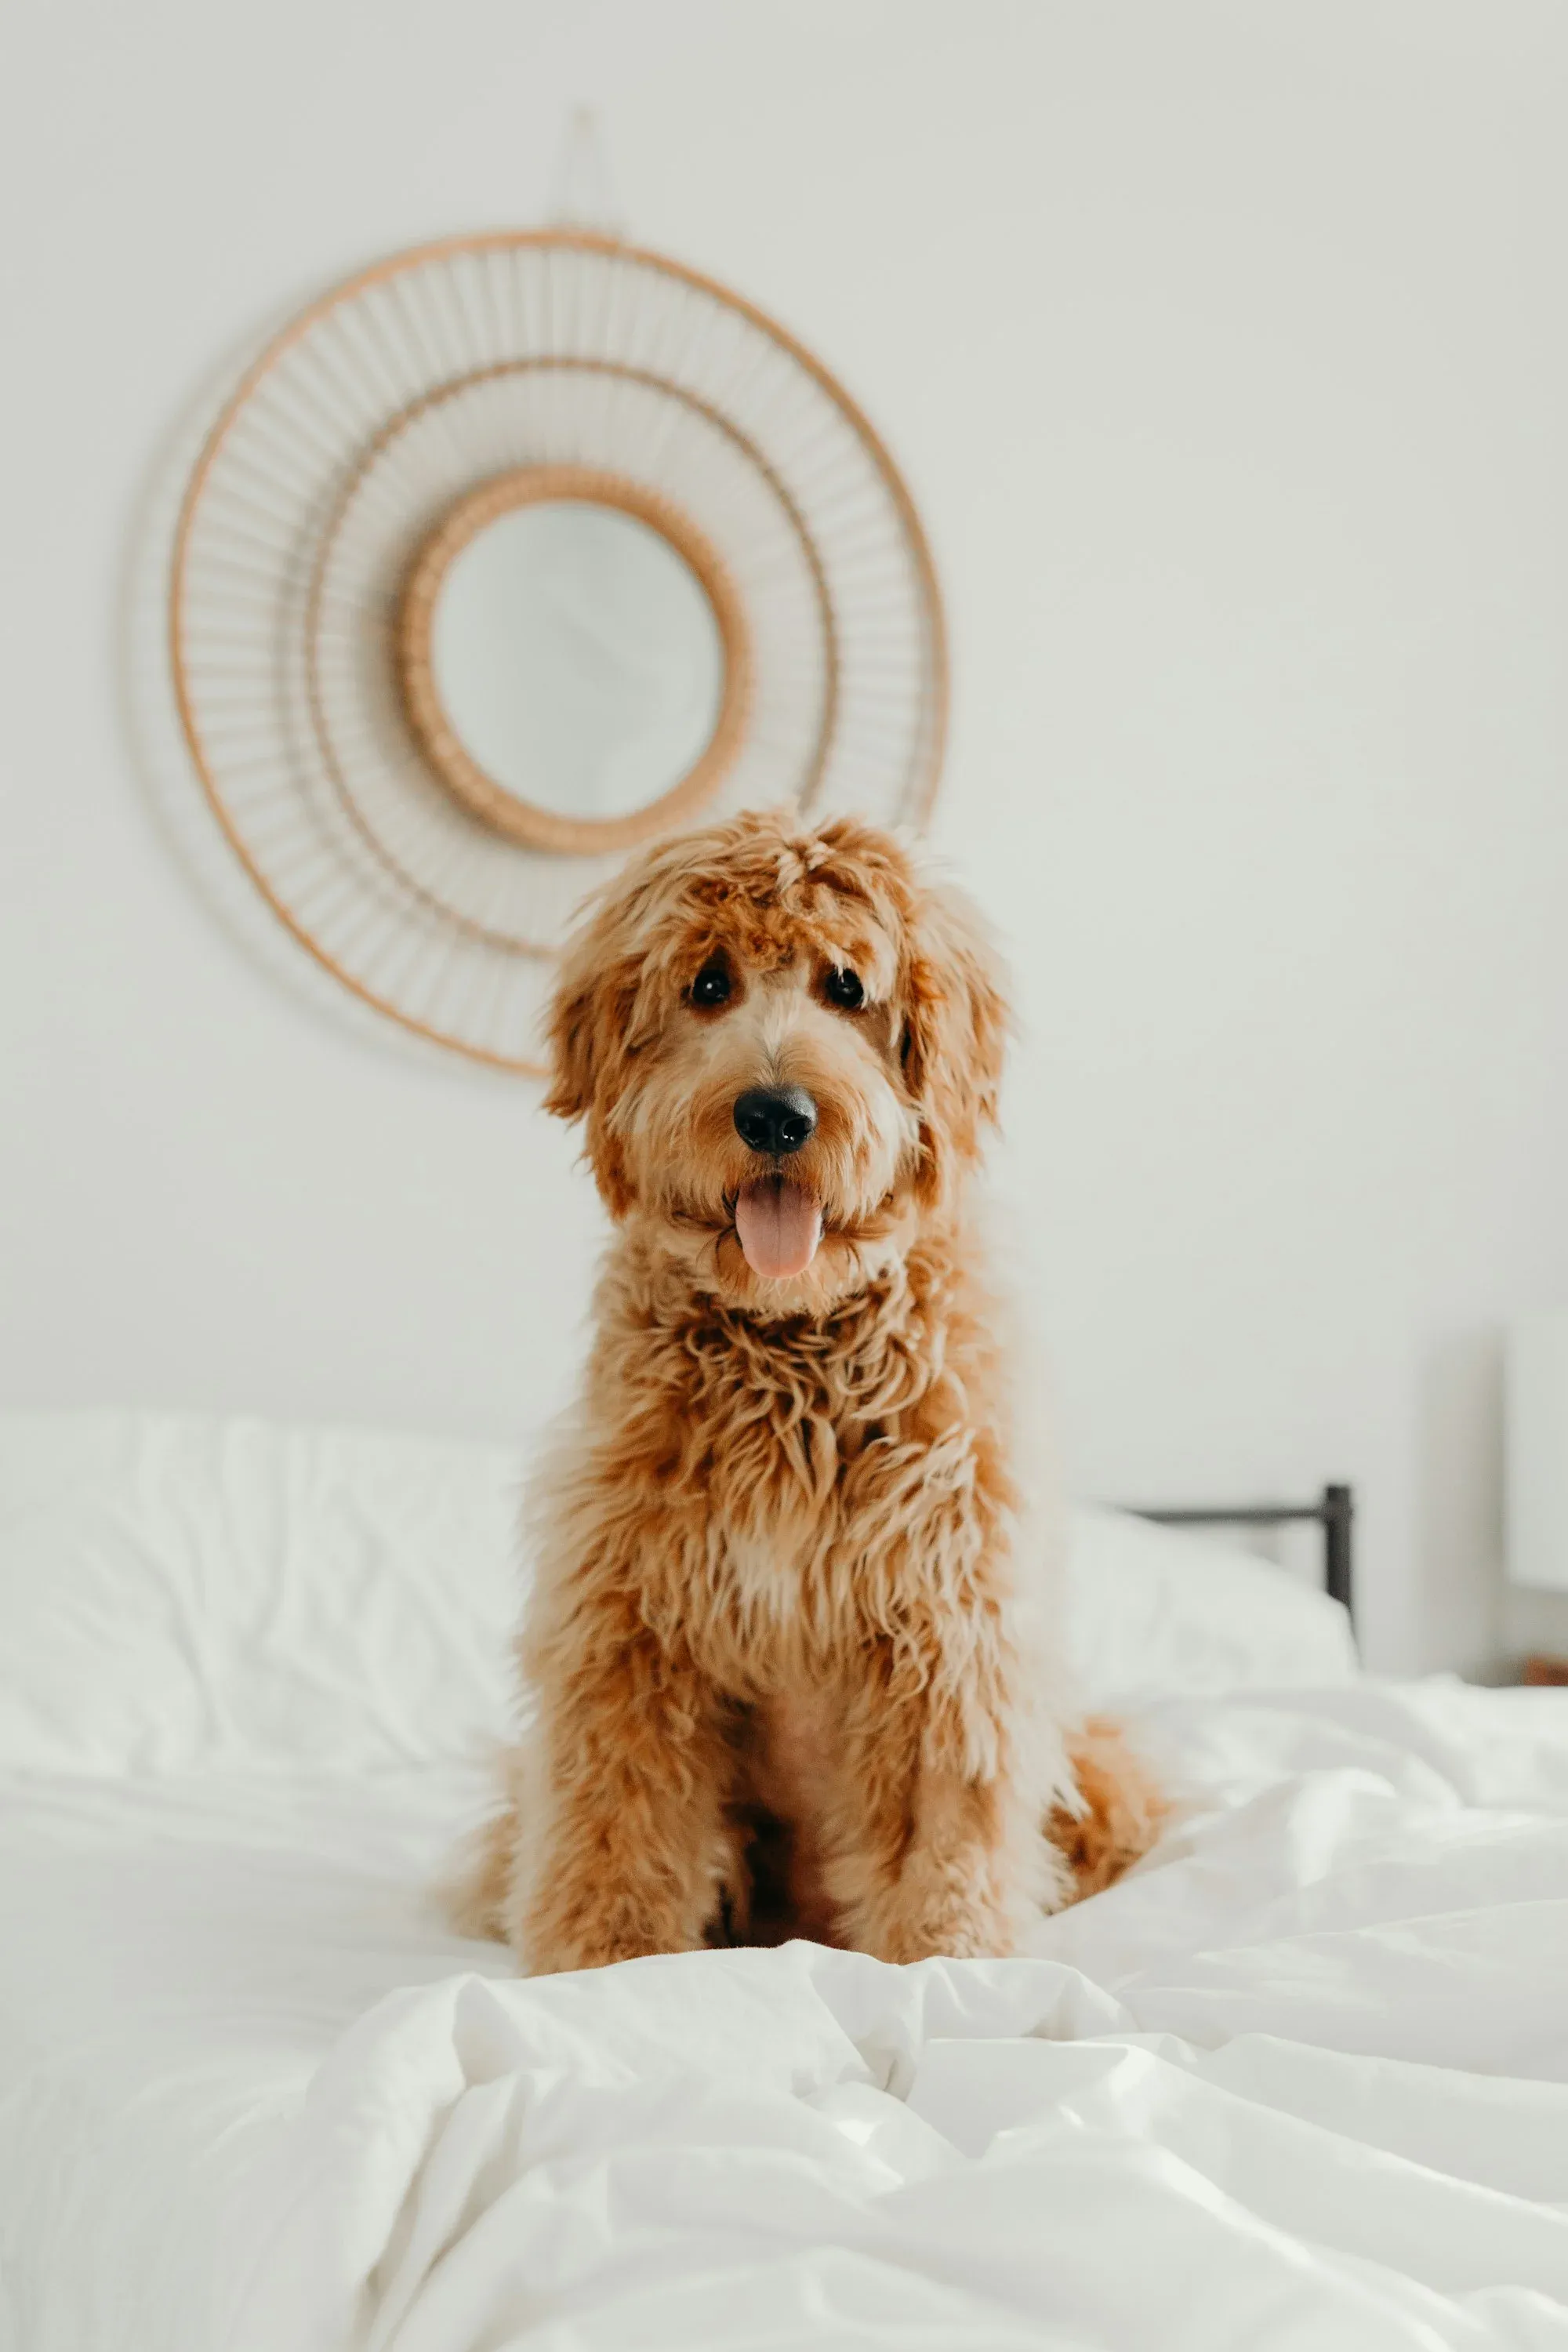 Are Goldendoodles Always Curly?